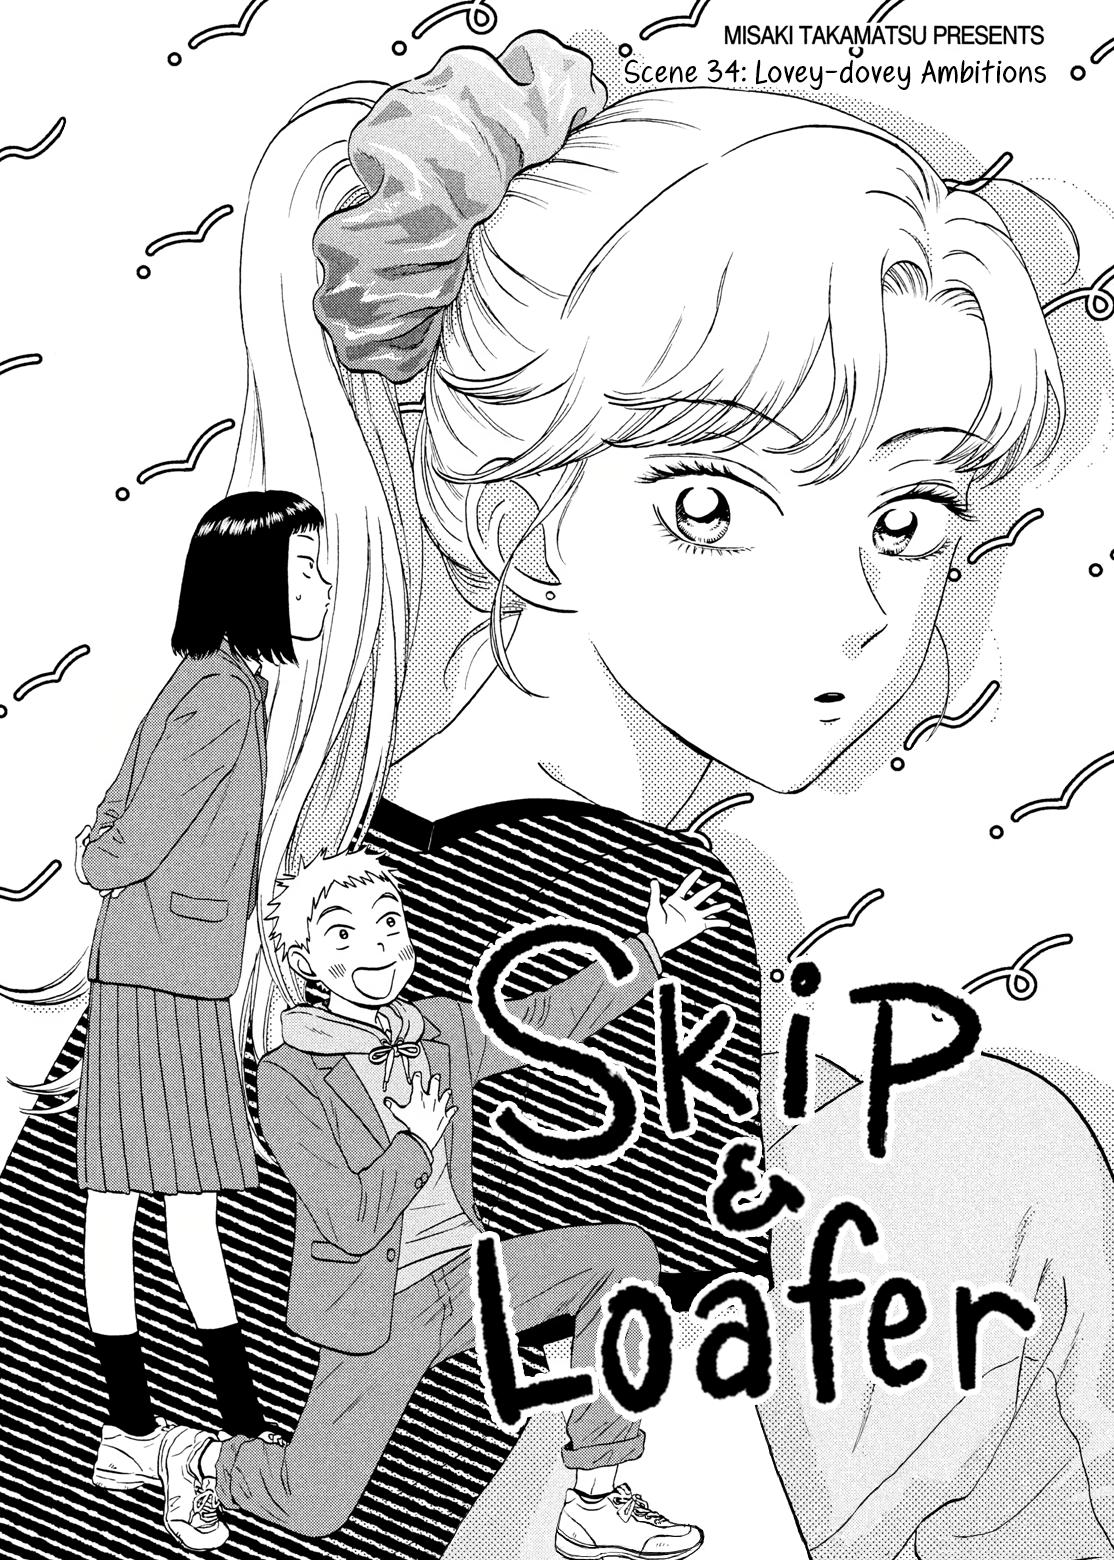 Read Skip To Loafer Chapter 56: Weary Road Home on Mangakakalot